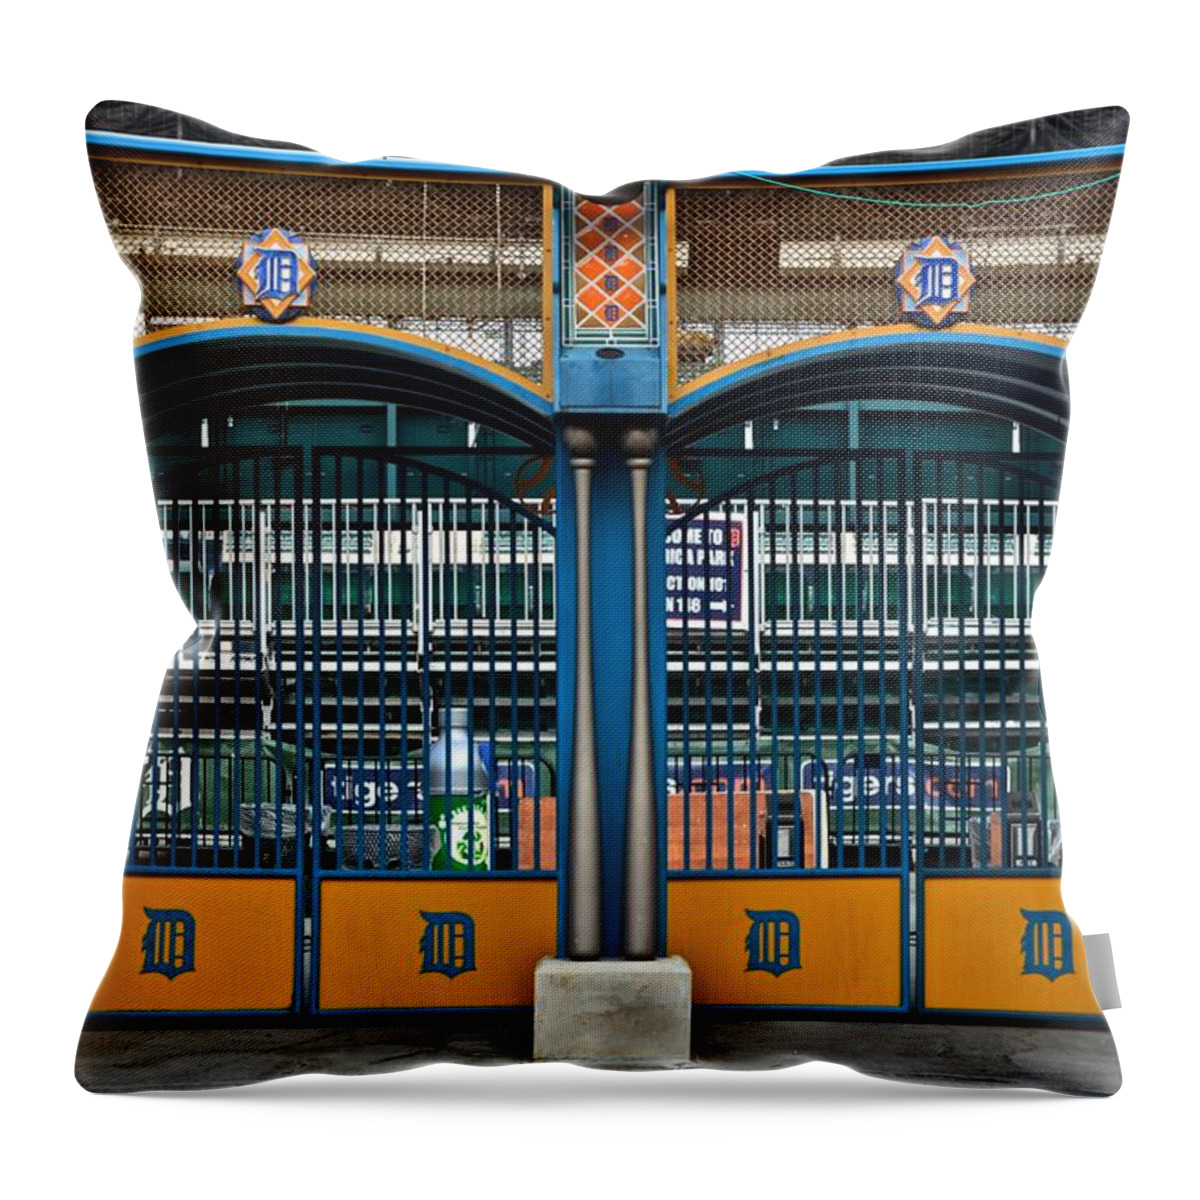 Detroit Throw Pillow featuring the photograph Tigers Baseball by Frozen in Time Fine Art Photography